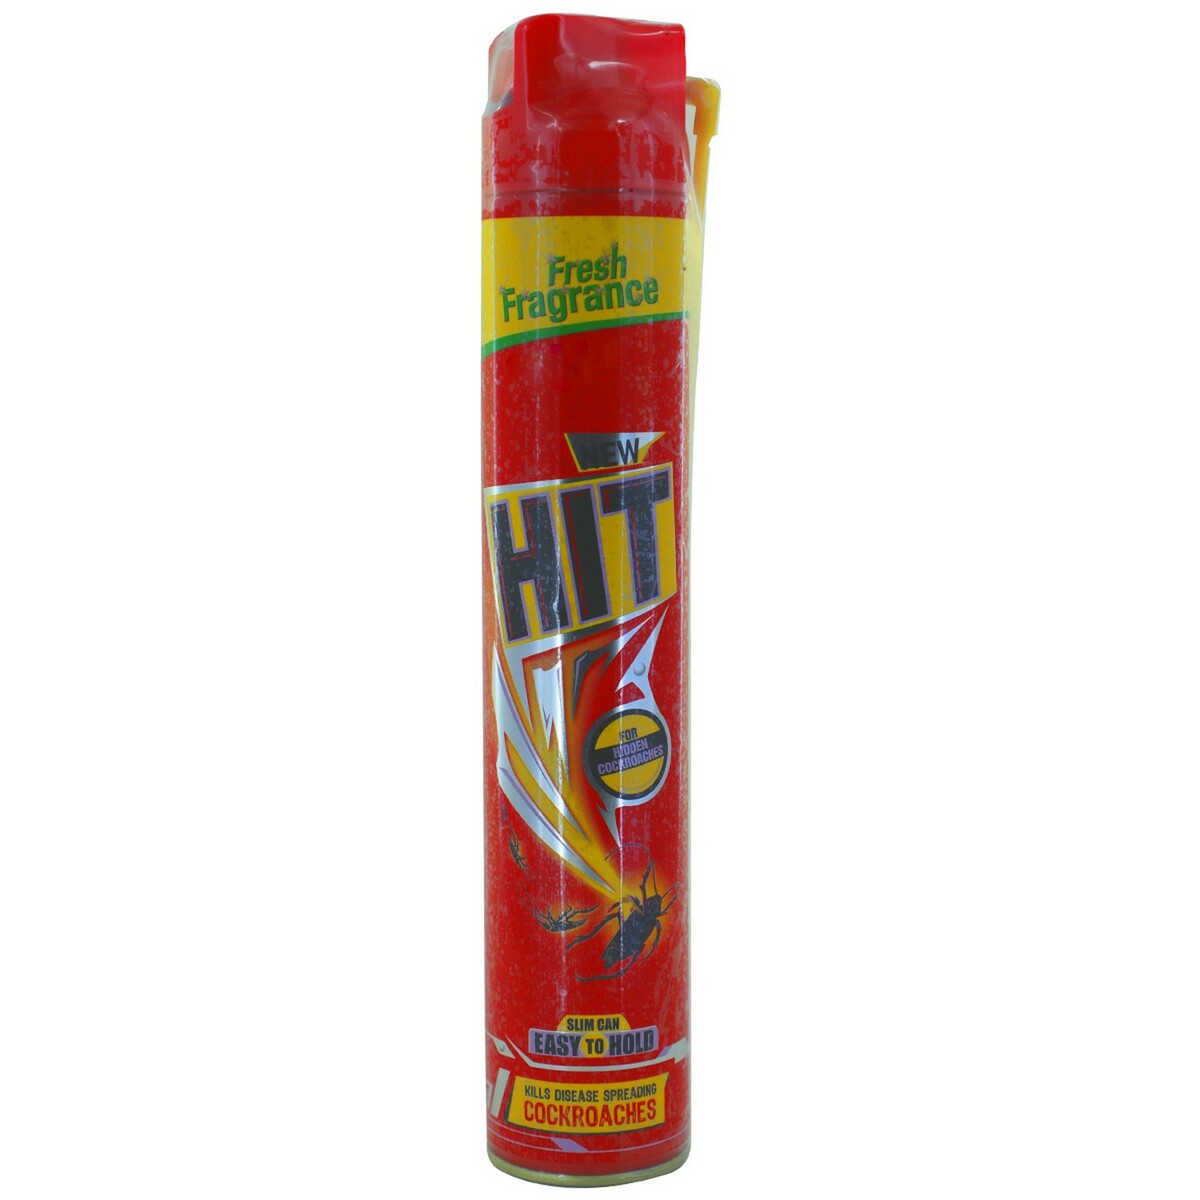 Hit Crawling Insect Killer 400ml